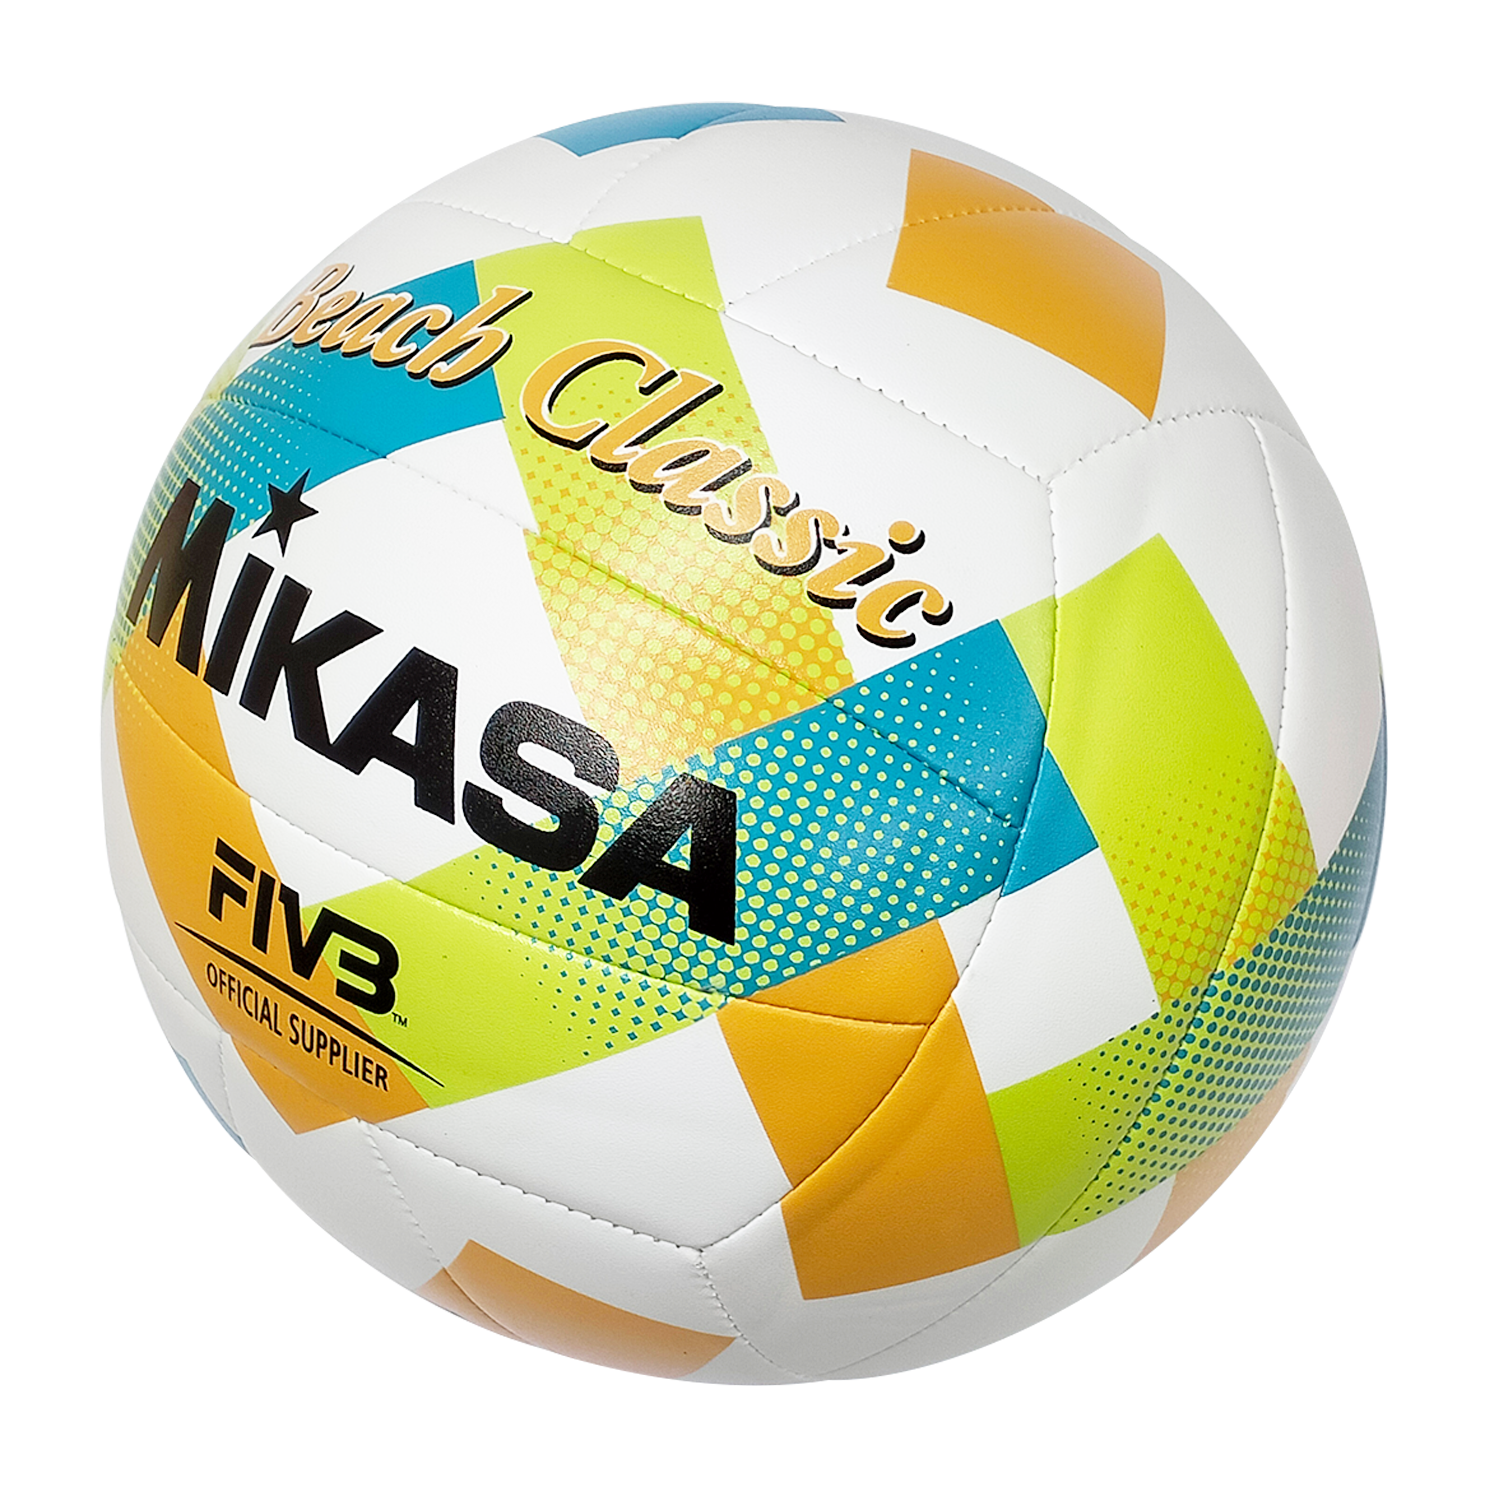 MIKASA BEACH VOLLEYBALL SOFT STITCHED COVER LG, , large image number null